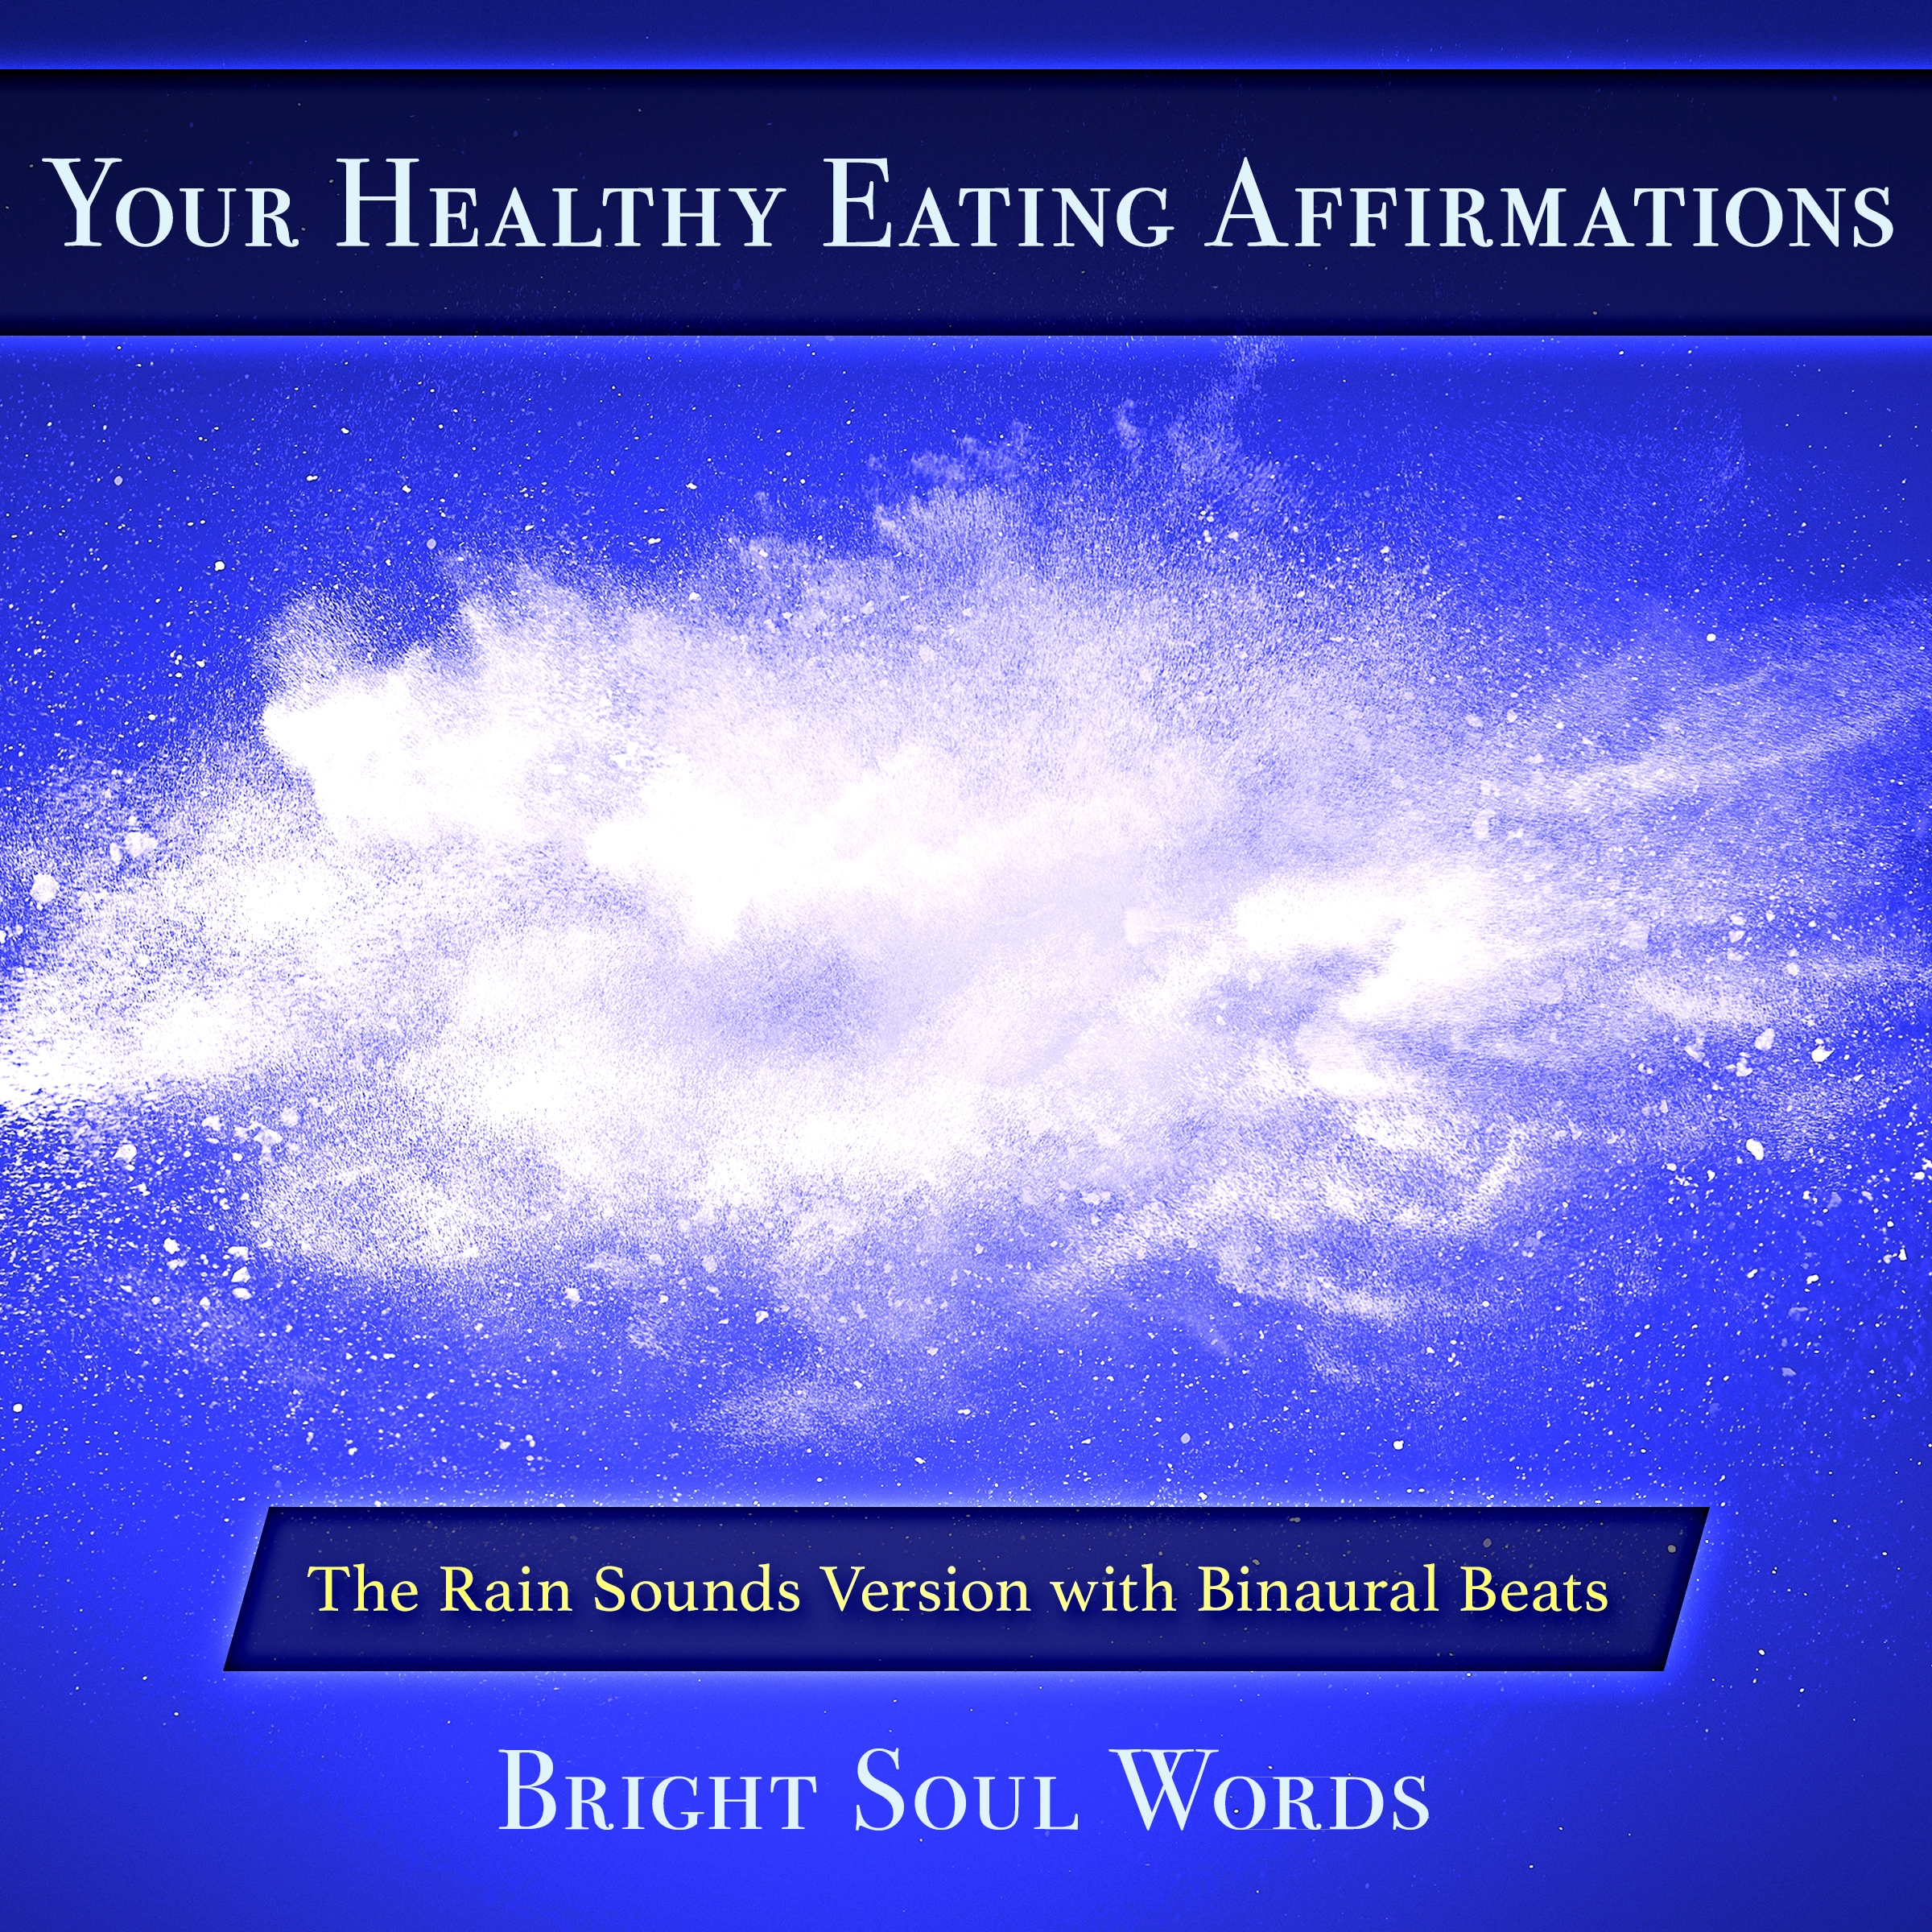 Your Healthy Eating Affirmations: The Rain Sounds Version with Binaural Beats Audiobook by Bright Soul Words